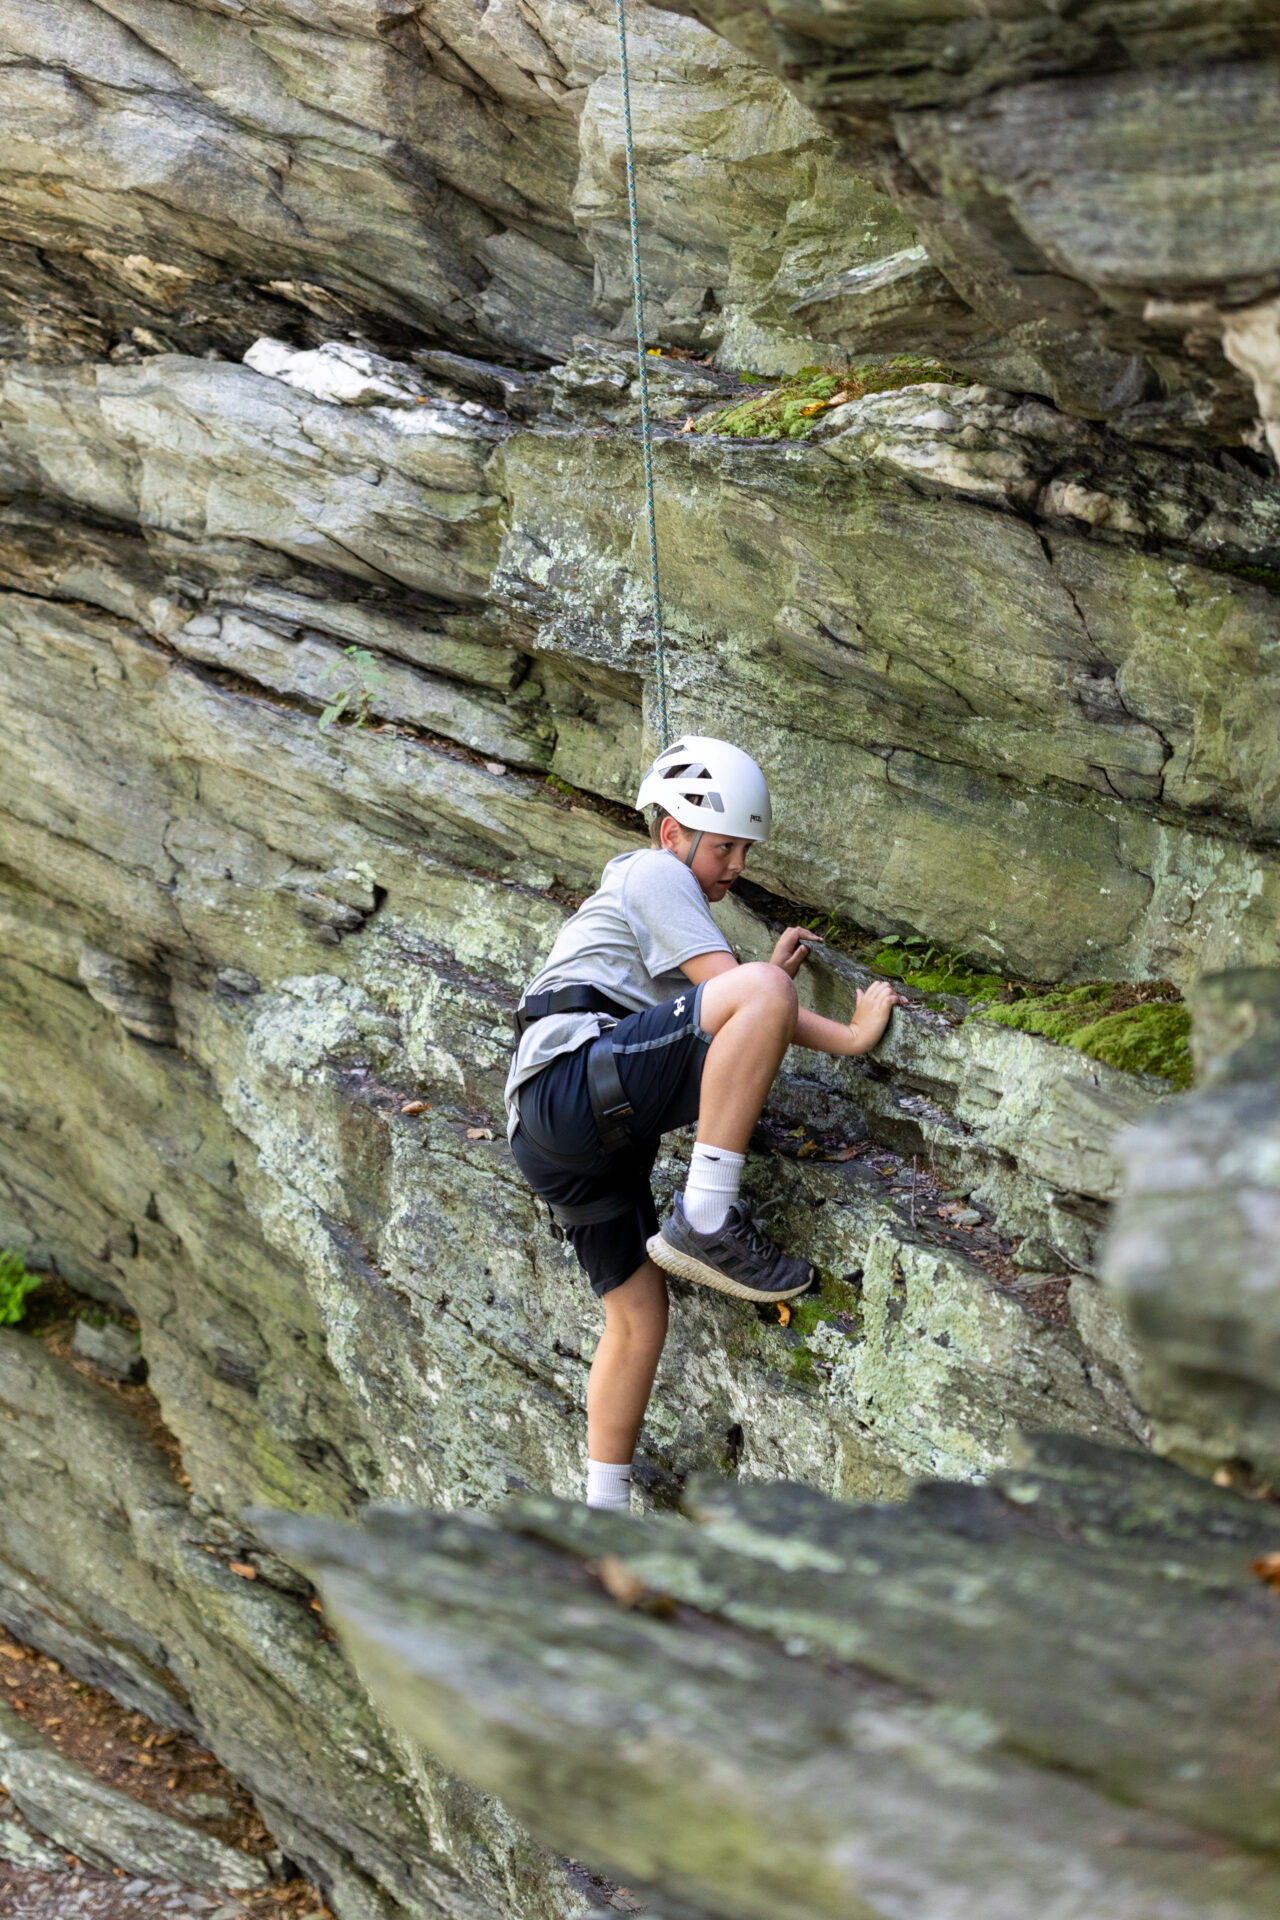 A young boy fearlessly scaling a rocky cliff, leaving behind his BearTrax.